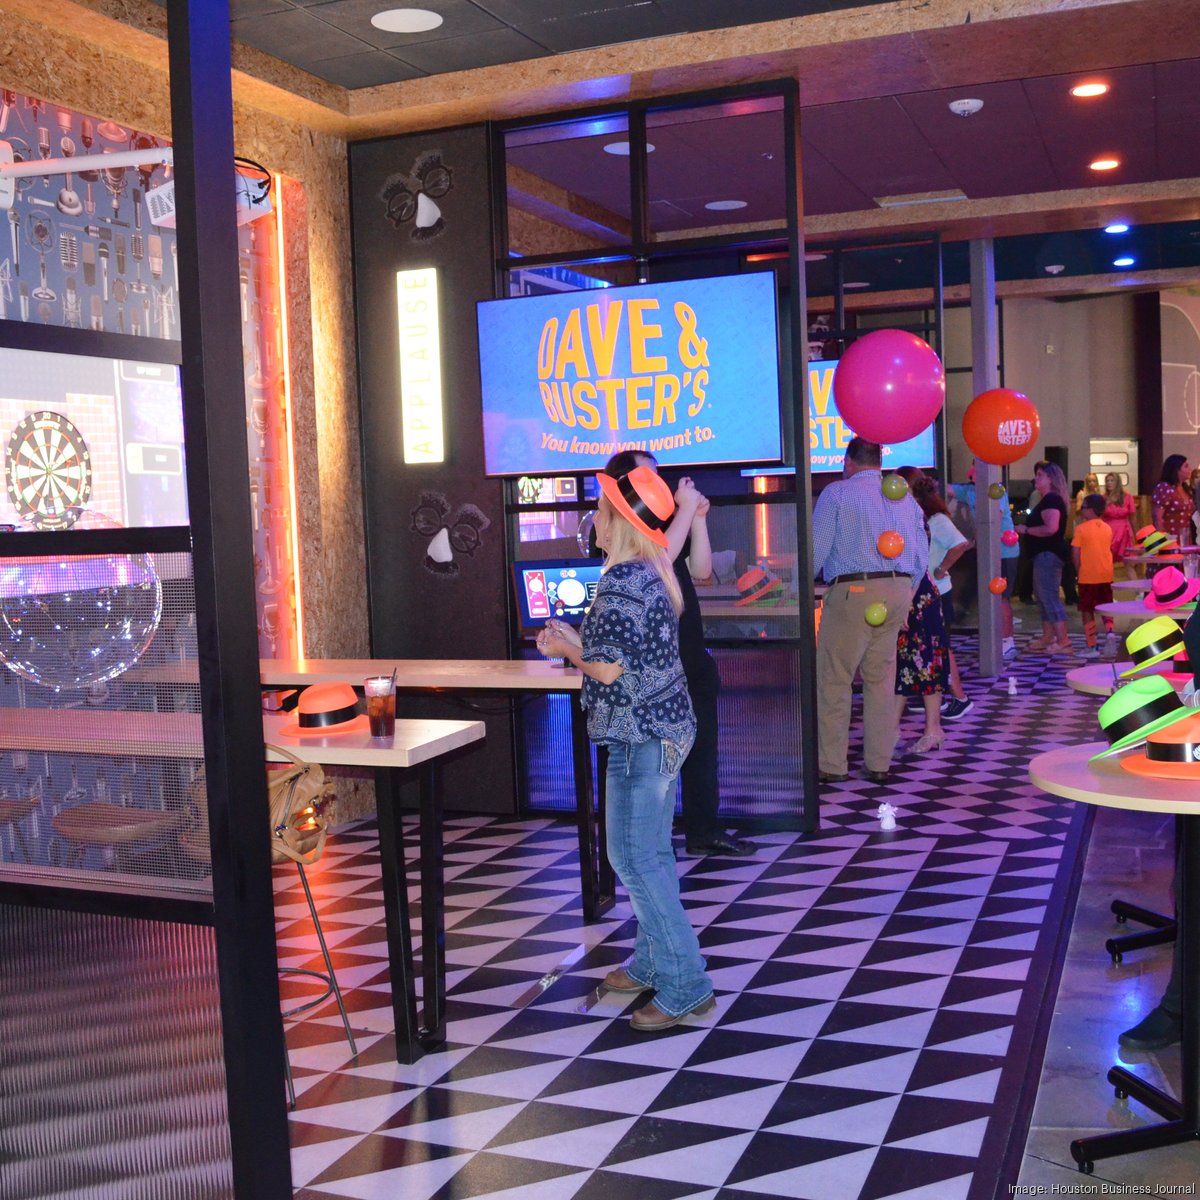 Dave & Buster's Wants to Grow Up